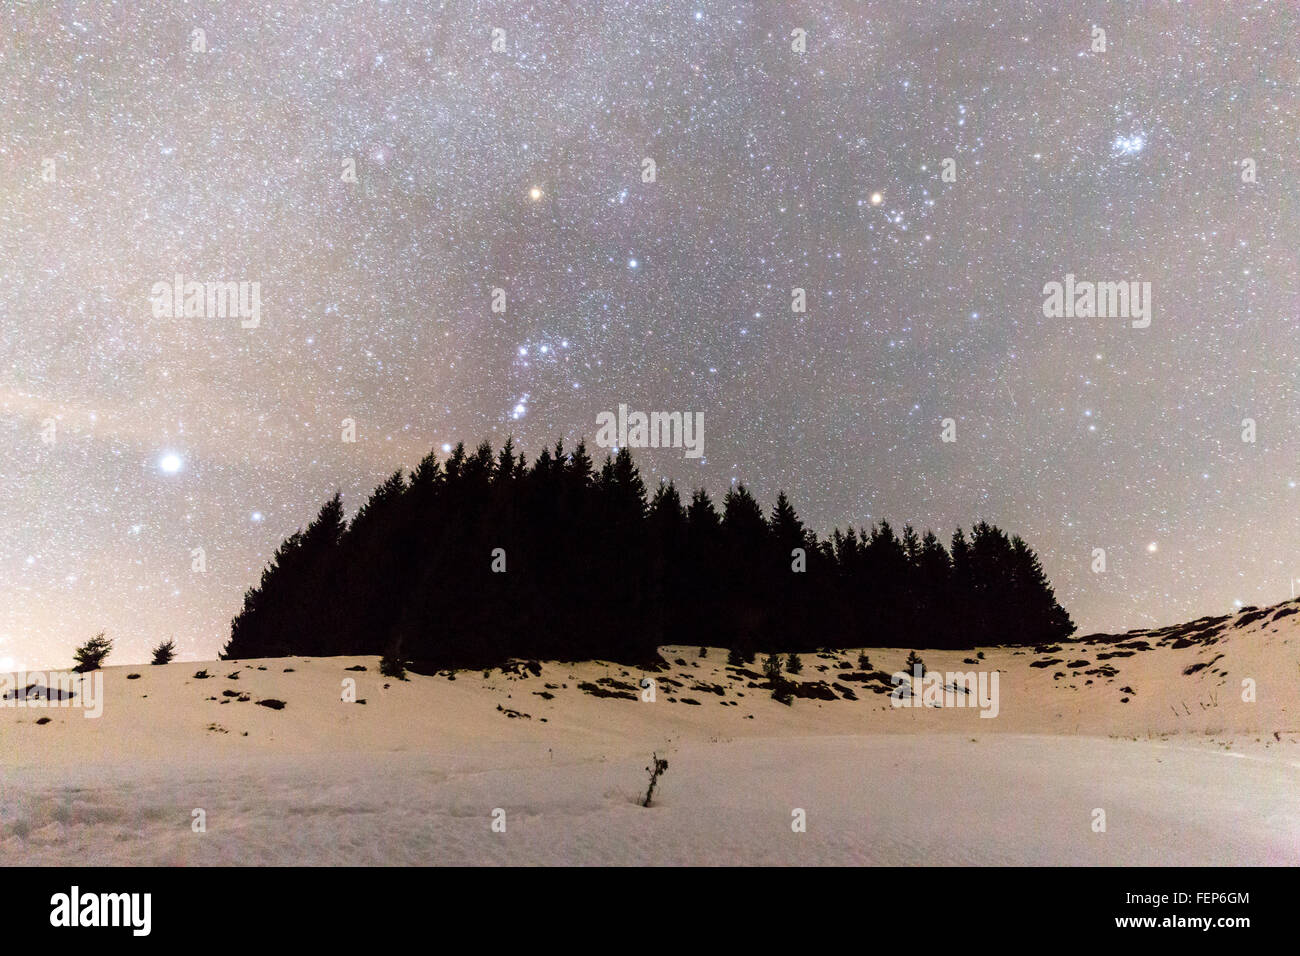 The Milky Way over the winter mountain landscape with pine trees in the foreground. Stock Photo